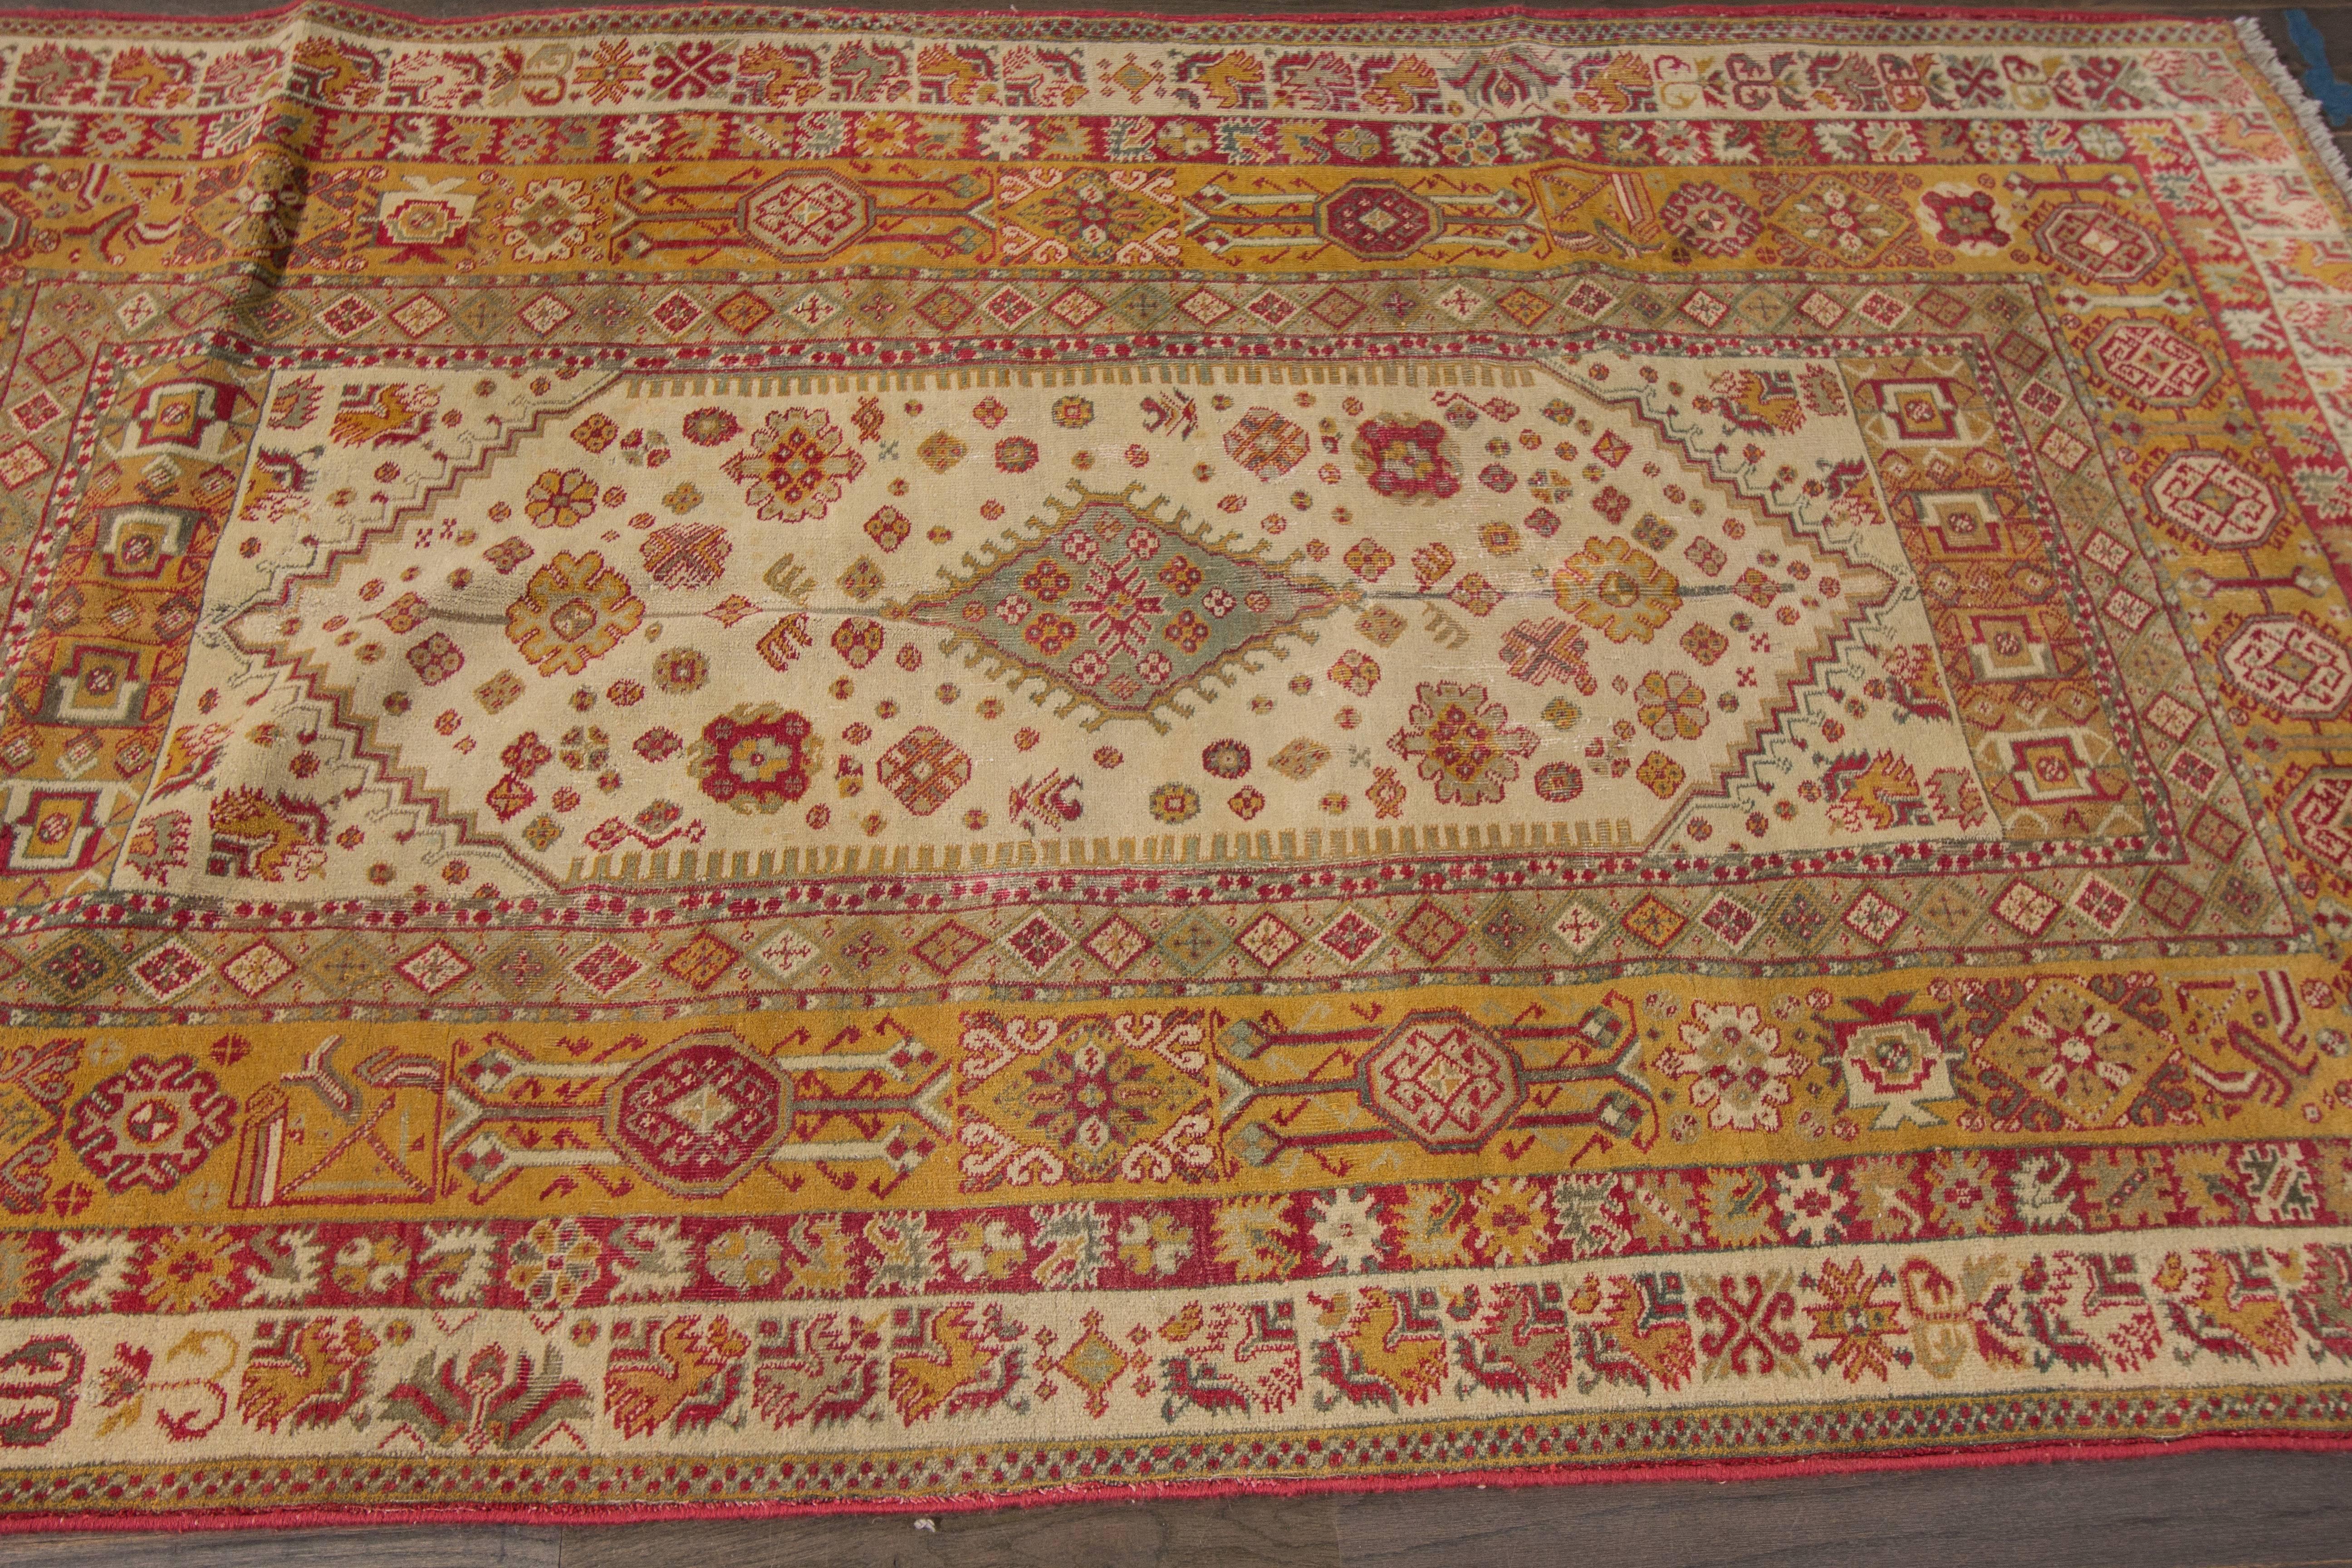 This beautiful antique Indian Agra hand-knotted design rug will make your floor look splendid. This collection is made in wool. It's measures are: 8'.4 x 11'.6
This antique Indian Agra rug was made in India and it's patterns consist of a centrally